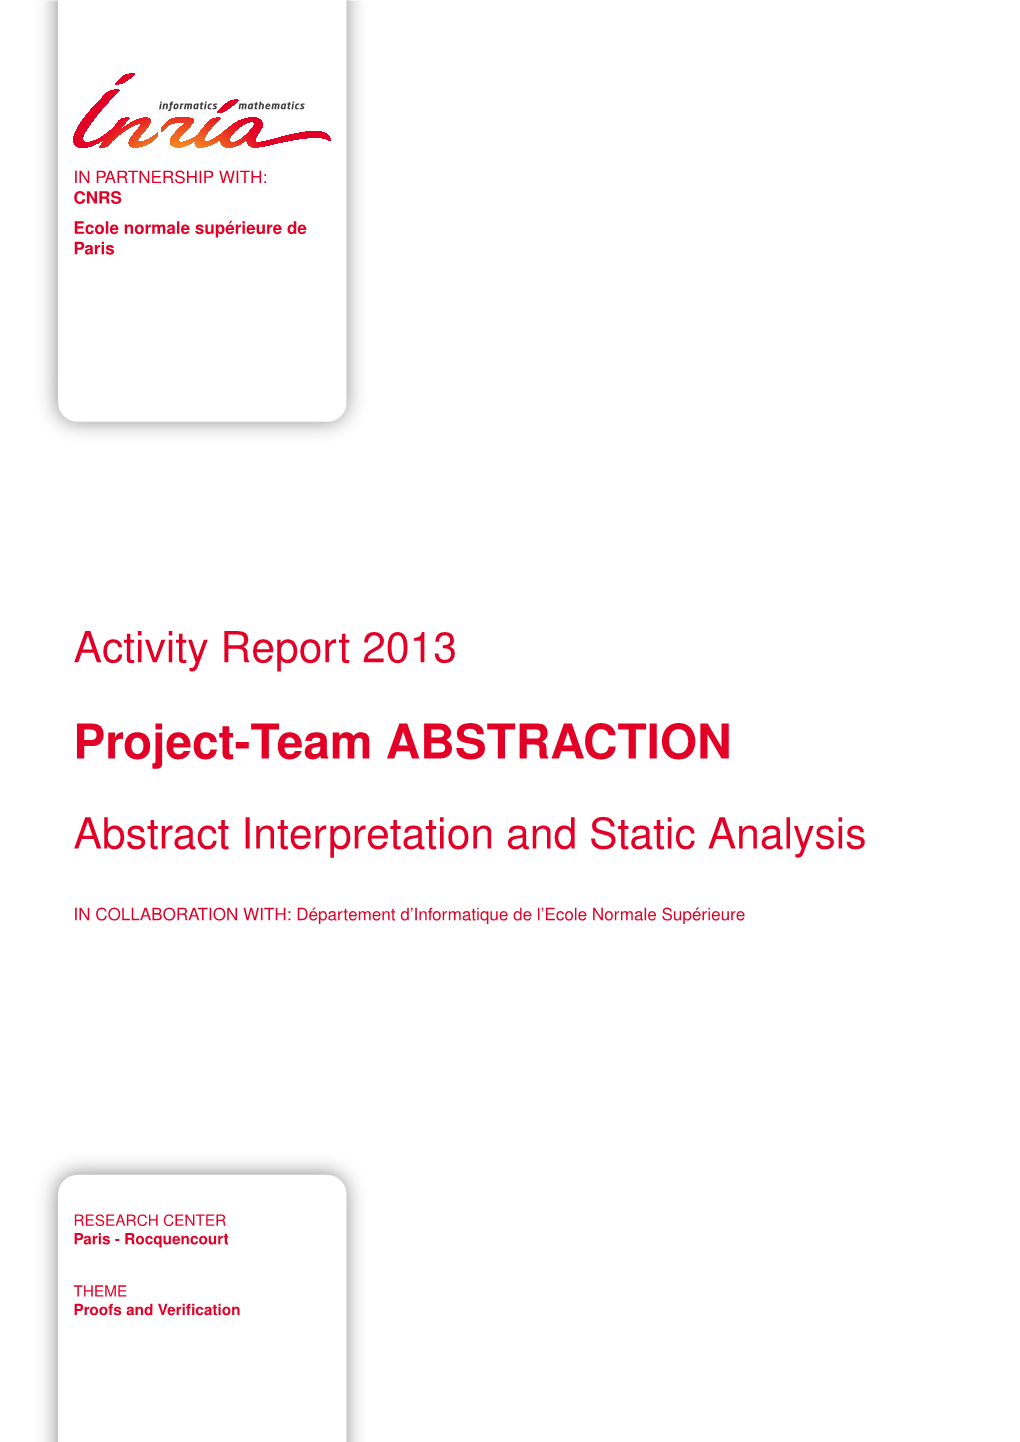 Project-Team ABSTRACTION